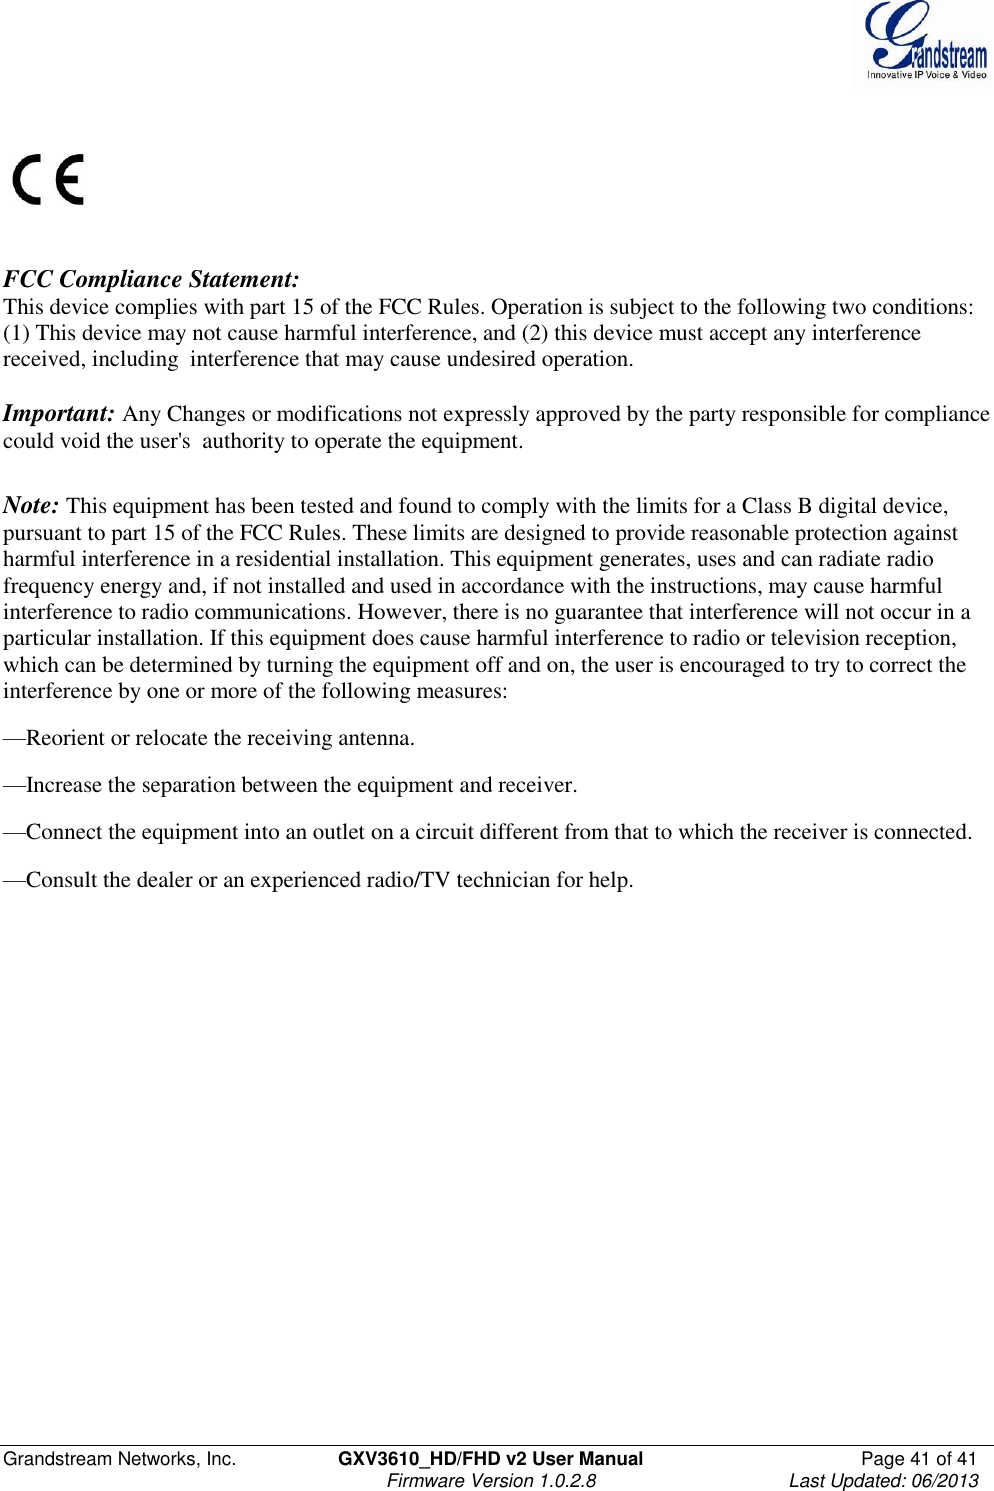  Grandstream Networks, Inc.  GXV3610_HD/FHD v2 User Manual  Page 41 of 41    Firmware Version 1.0.2.8  Last Updated: 06/2013      FCC Compliance Statement: This device complies with part 15 of the FCC Rules. Operation is subject to the following two conditions:  (1) This device may not cause harmful interference, and (2) this device must accept any interference received, including  interference that may cause undesired operation.      Important: Any Changes or modifications not expressly approved by the party responsible for compliance could void the user&apos;s  authority to operate the equipment.      Note: This equipment has been tested and found to comply with the limits for a Class B digital device, pursuant to part 15 of the FCC Rules. These limits are designed to provide reasonable protection against harmful interference in a residential installation. This equipment generates, uses and can radiate radio frequency energy and, if not installed and used in accordance with the instructions, may cause harmful interference to radio communications. However, there is no guarantee that interference will not occur in a particular installation. If this equipment does cause harmful interference to radio or television reception, which can be determined by turning the equipment off and on, the user is encouraged to try to correct the interference by one or more of the following measures: —Reorient or relocate the receiving antenna. —Increase the separation between the equipment and receiver. —Connect the equipment into an outlet on a circuit different from that to which the receiver is connected. —Consult the dealer or an experienced radio/TV technician for help.  